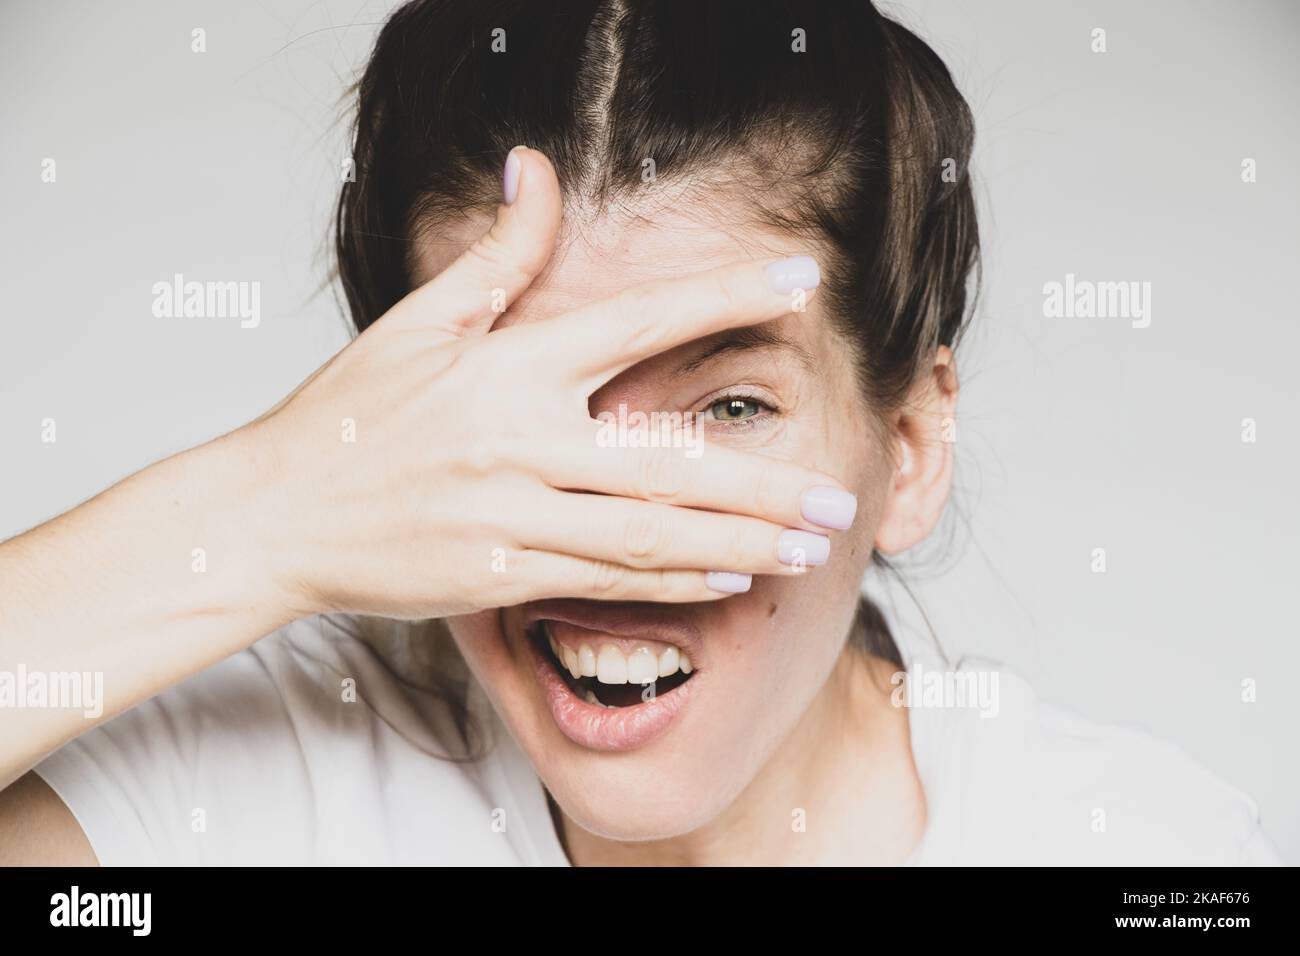 The girl closes one eye with her hand on a white background, looks through her hand, I see, I look Stock Photo